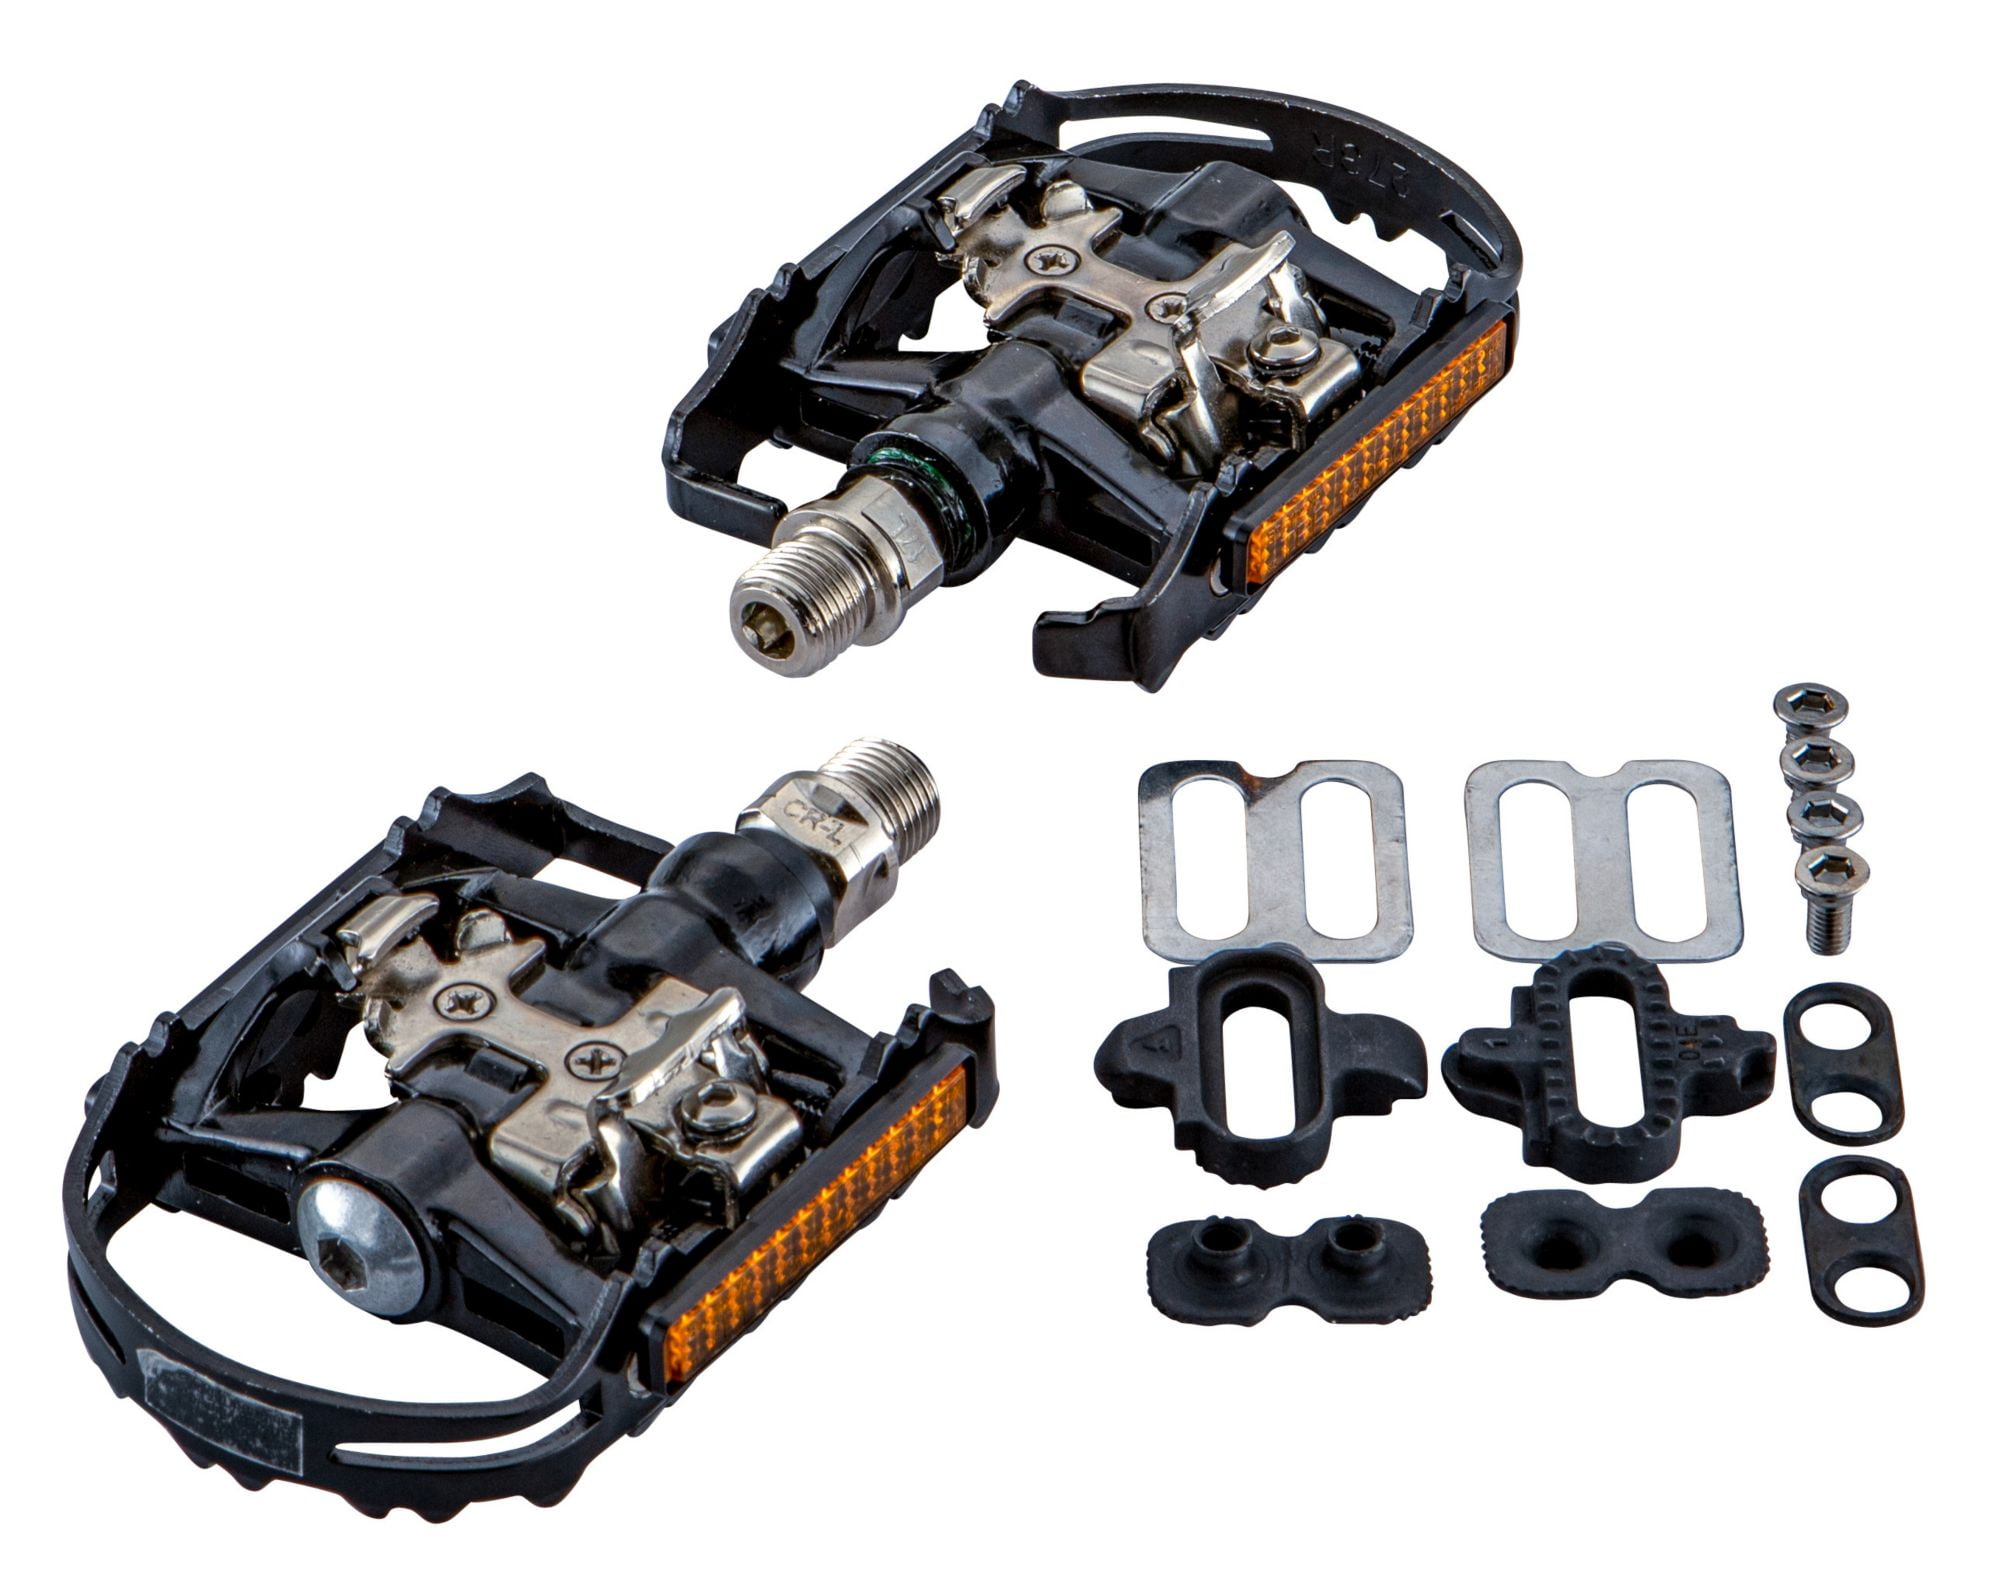 hybrid clipless pedals